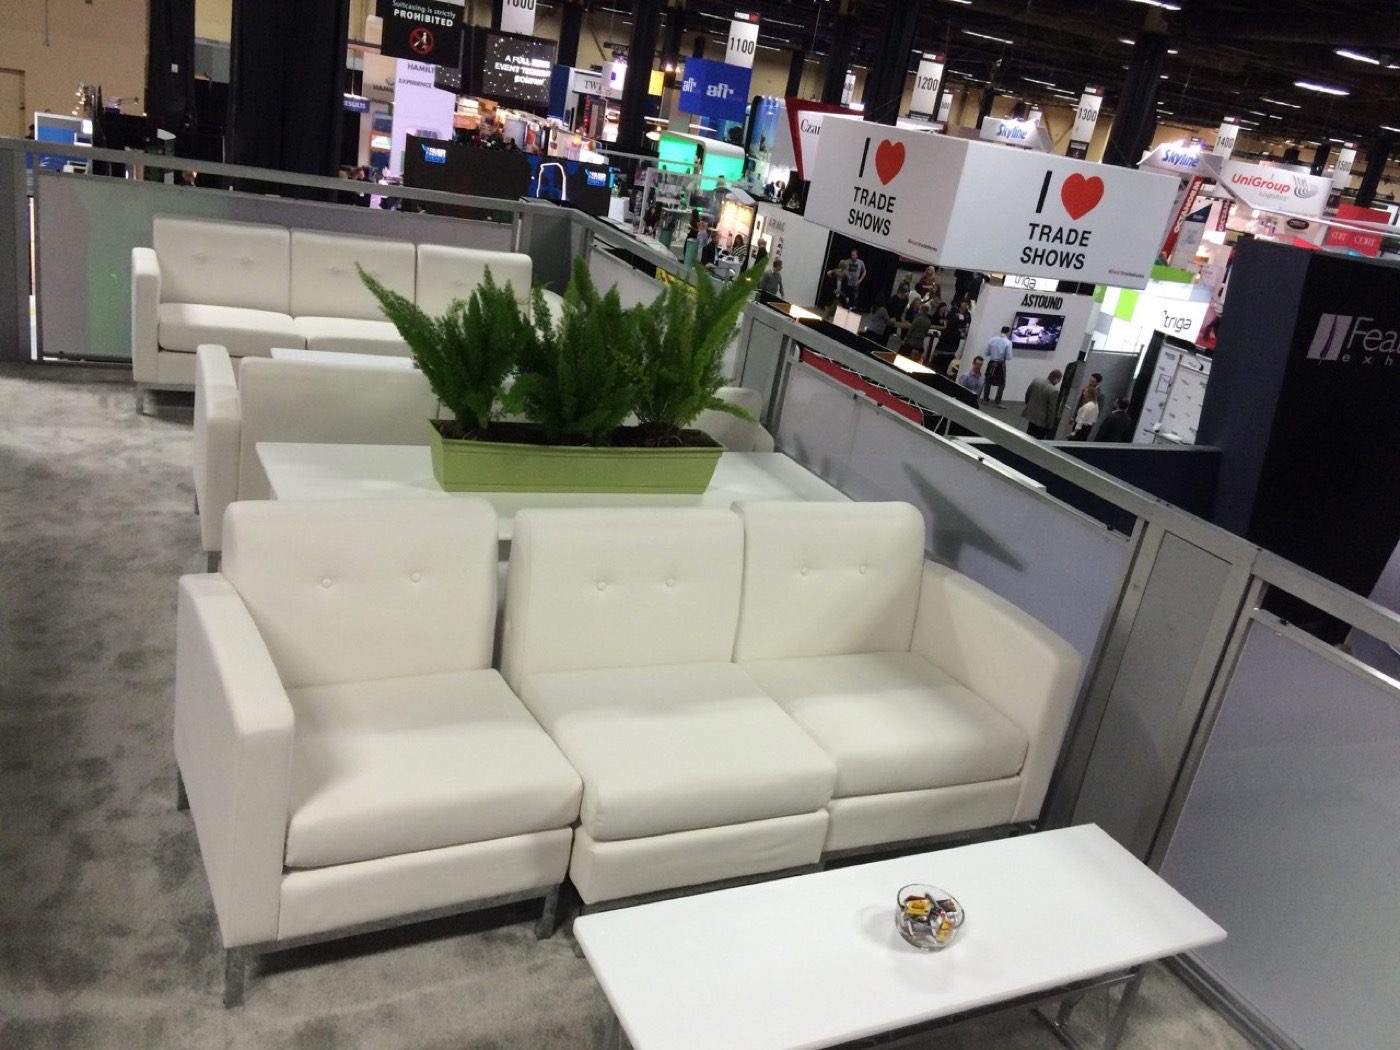 double deck trade show booth lounge seating